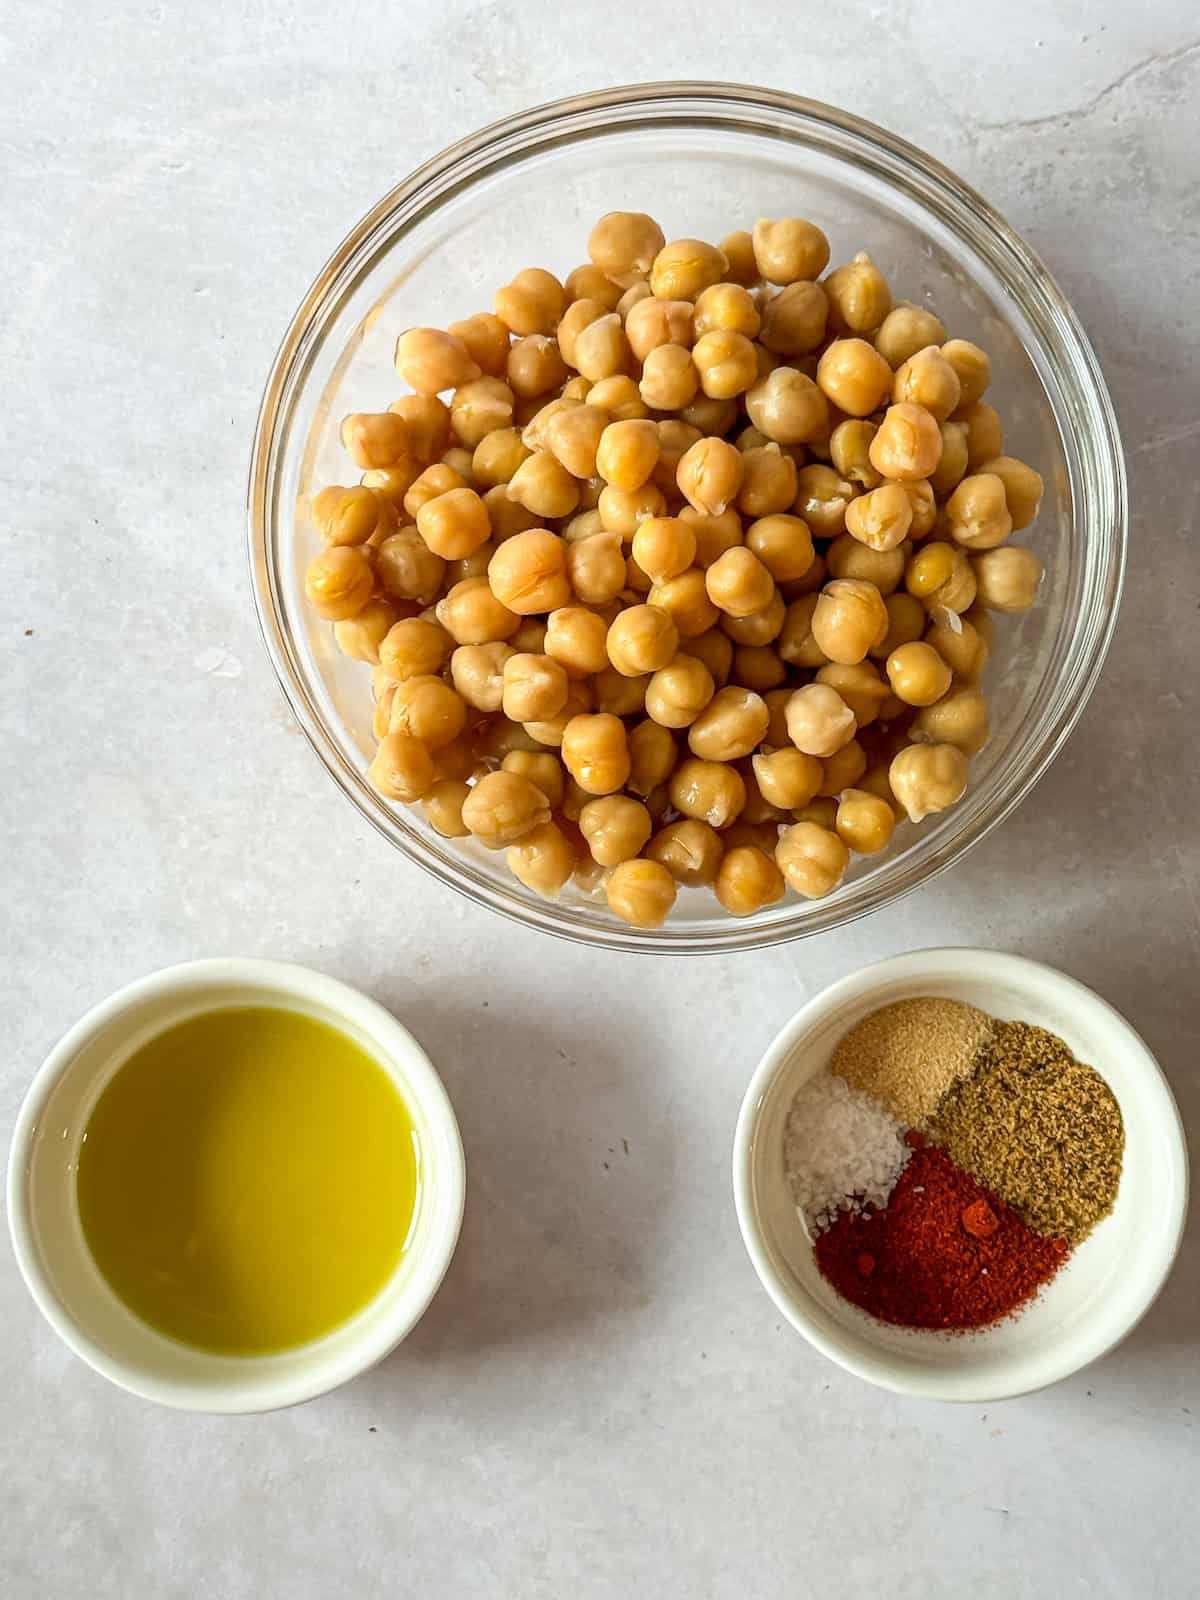 Ingredients for mediterranean roasted chickpeas on a table.